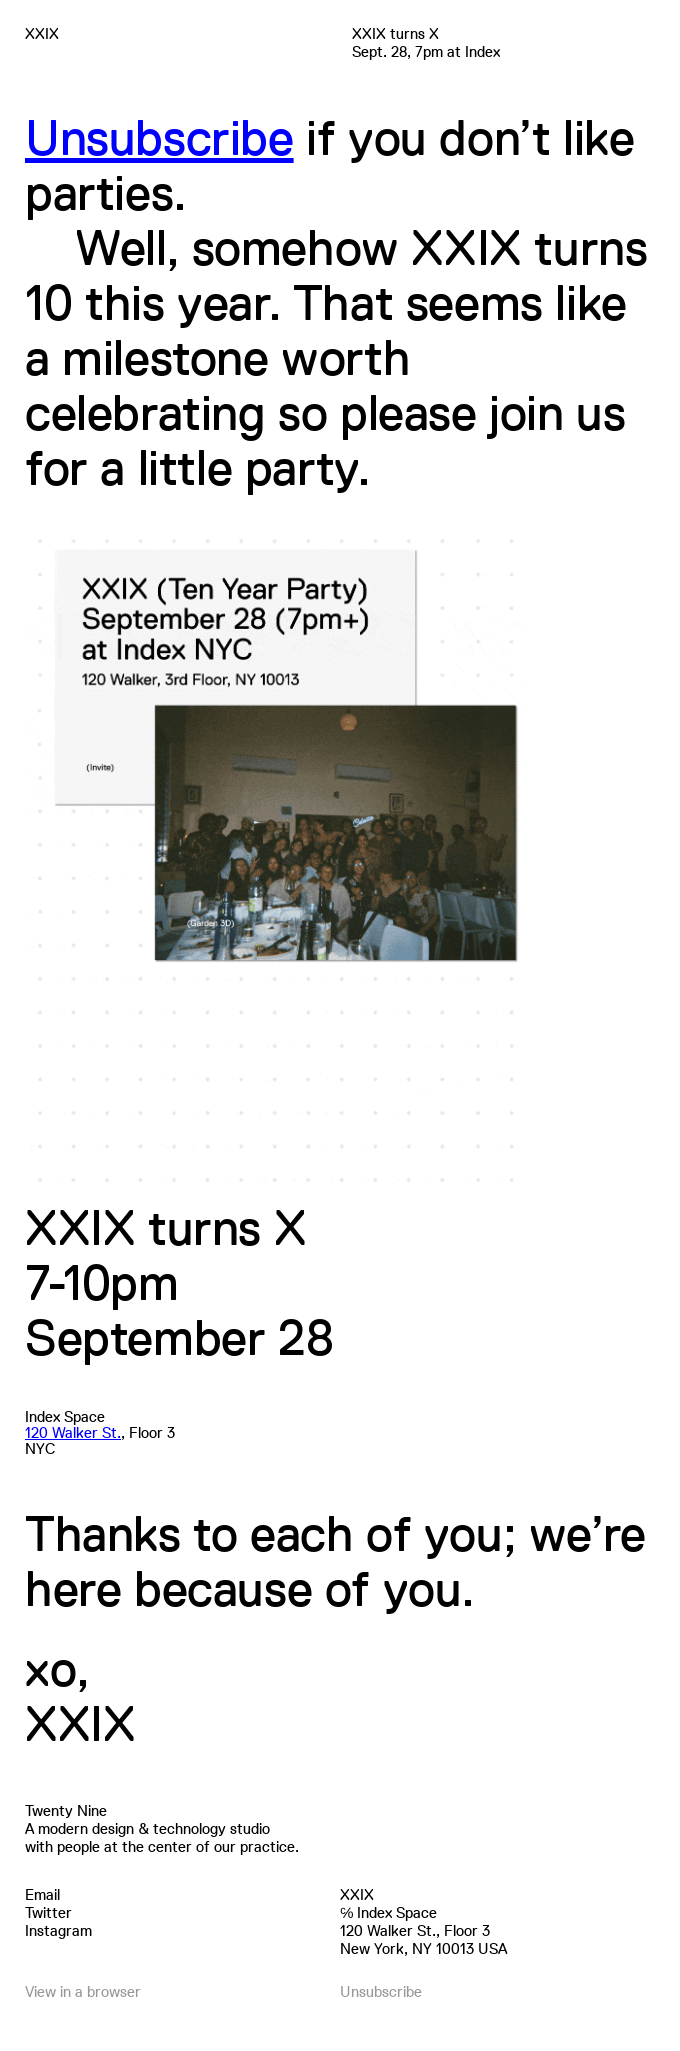 An email announcing the design studio’s ten-year anniversary party with bold text against a white background